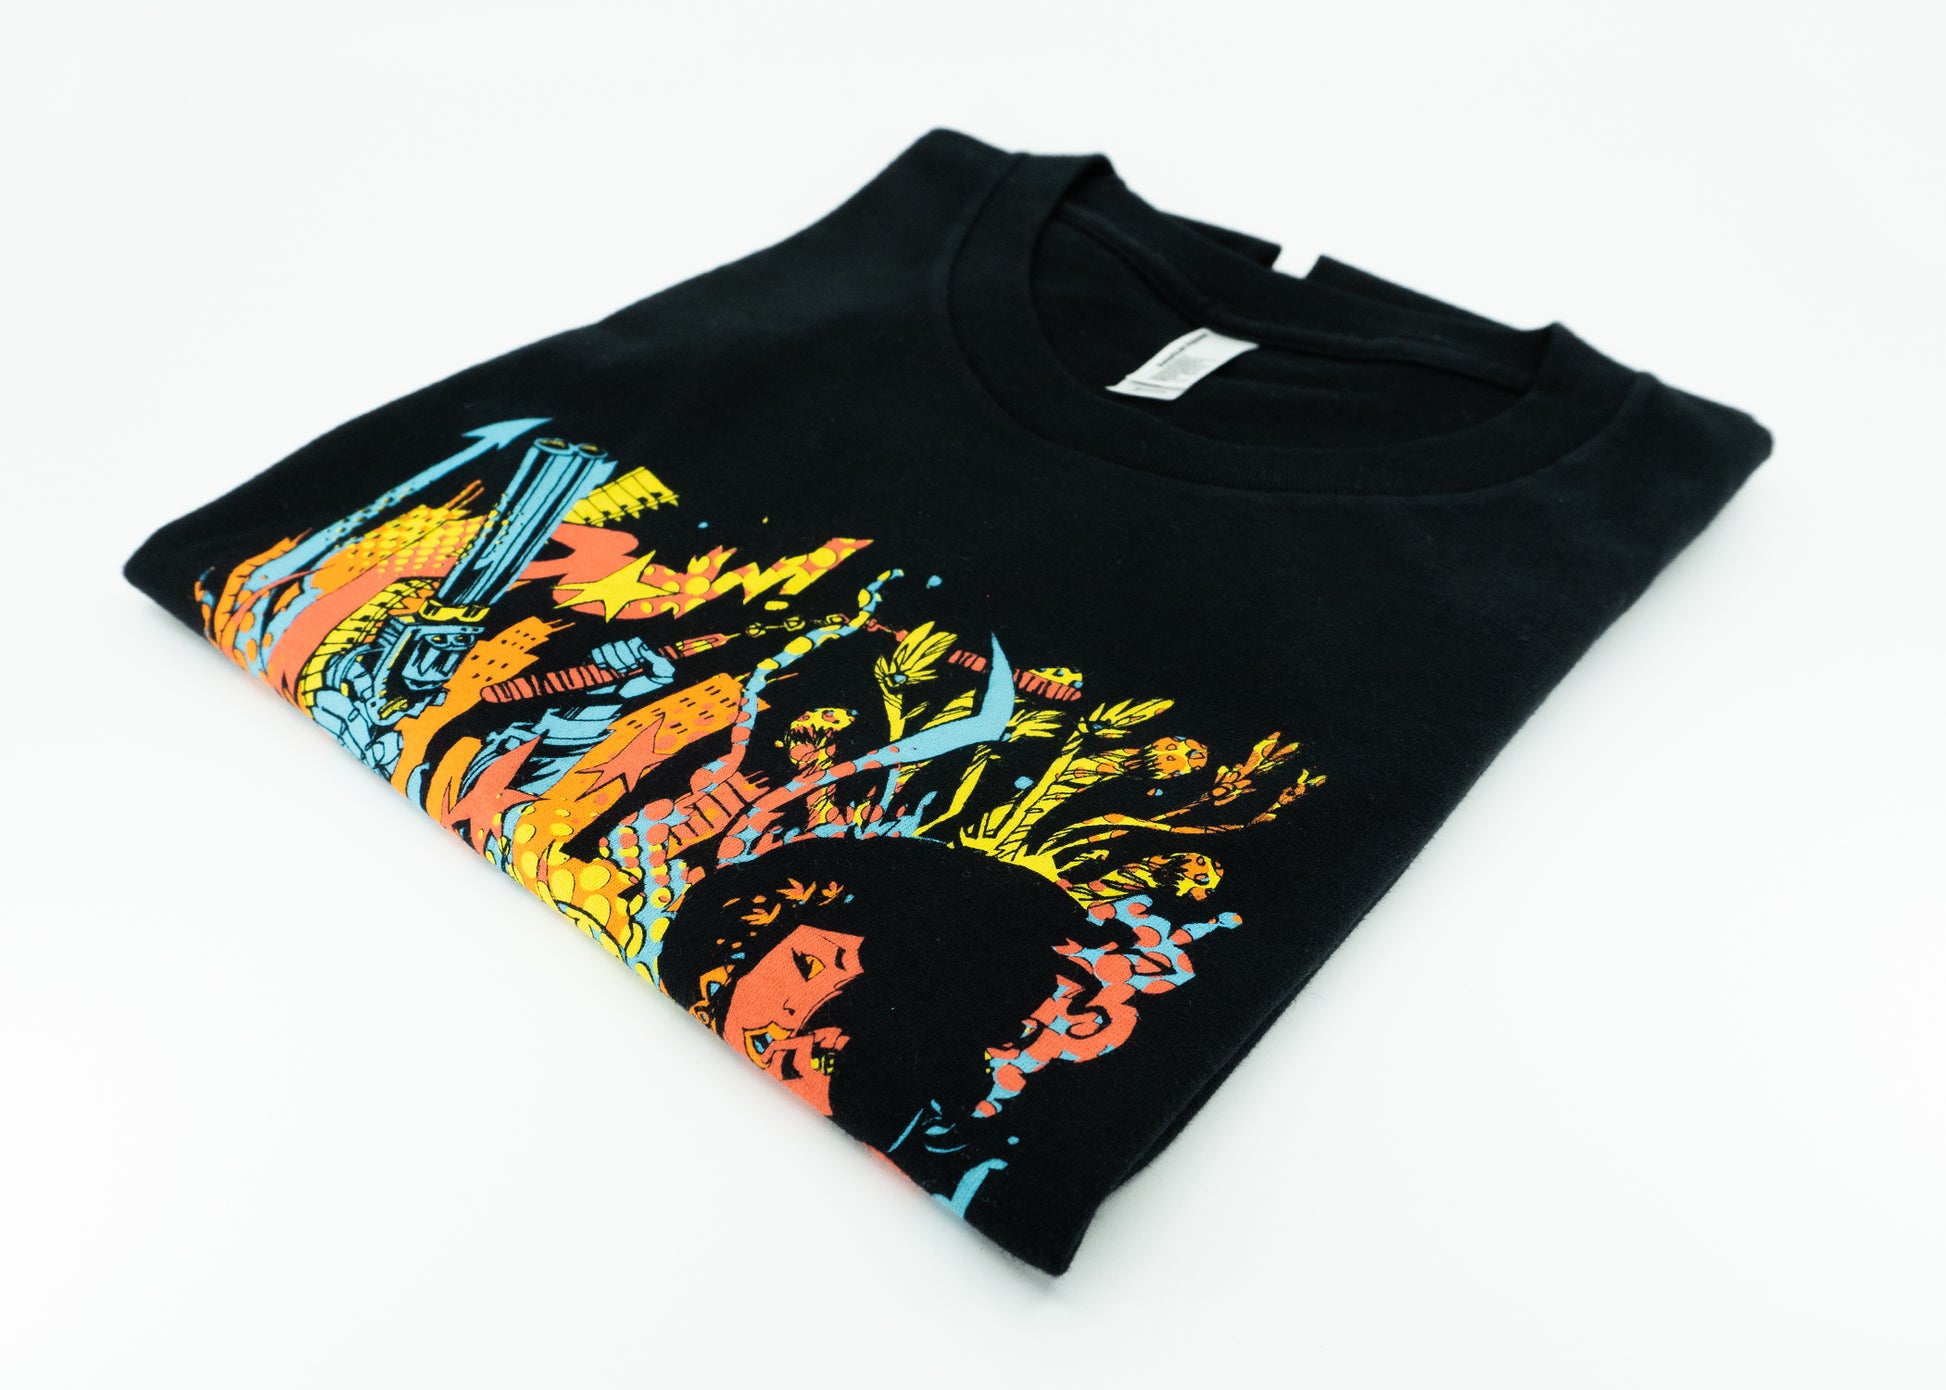 BLACK DYNAMITE! Jim Mahfood "Psychedelic Freakout" Tee by Titmouse Detail View